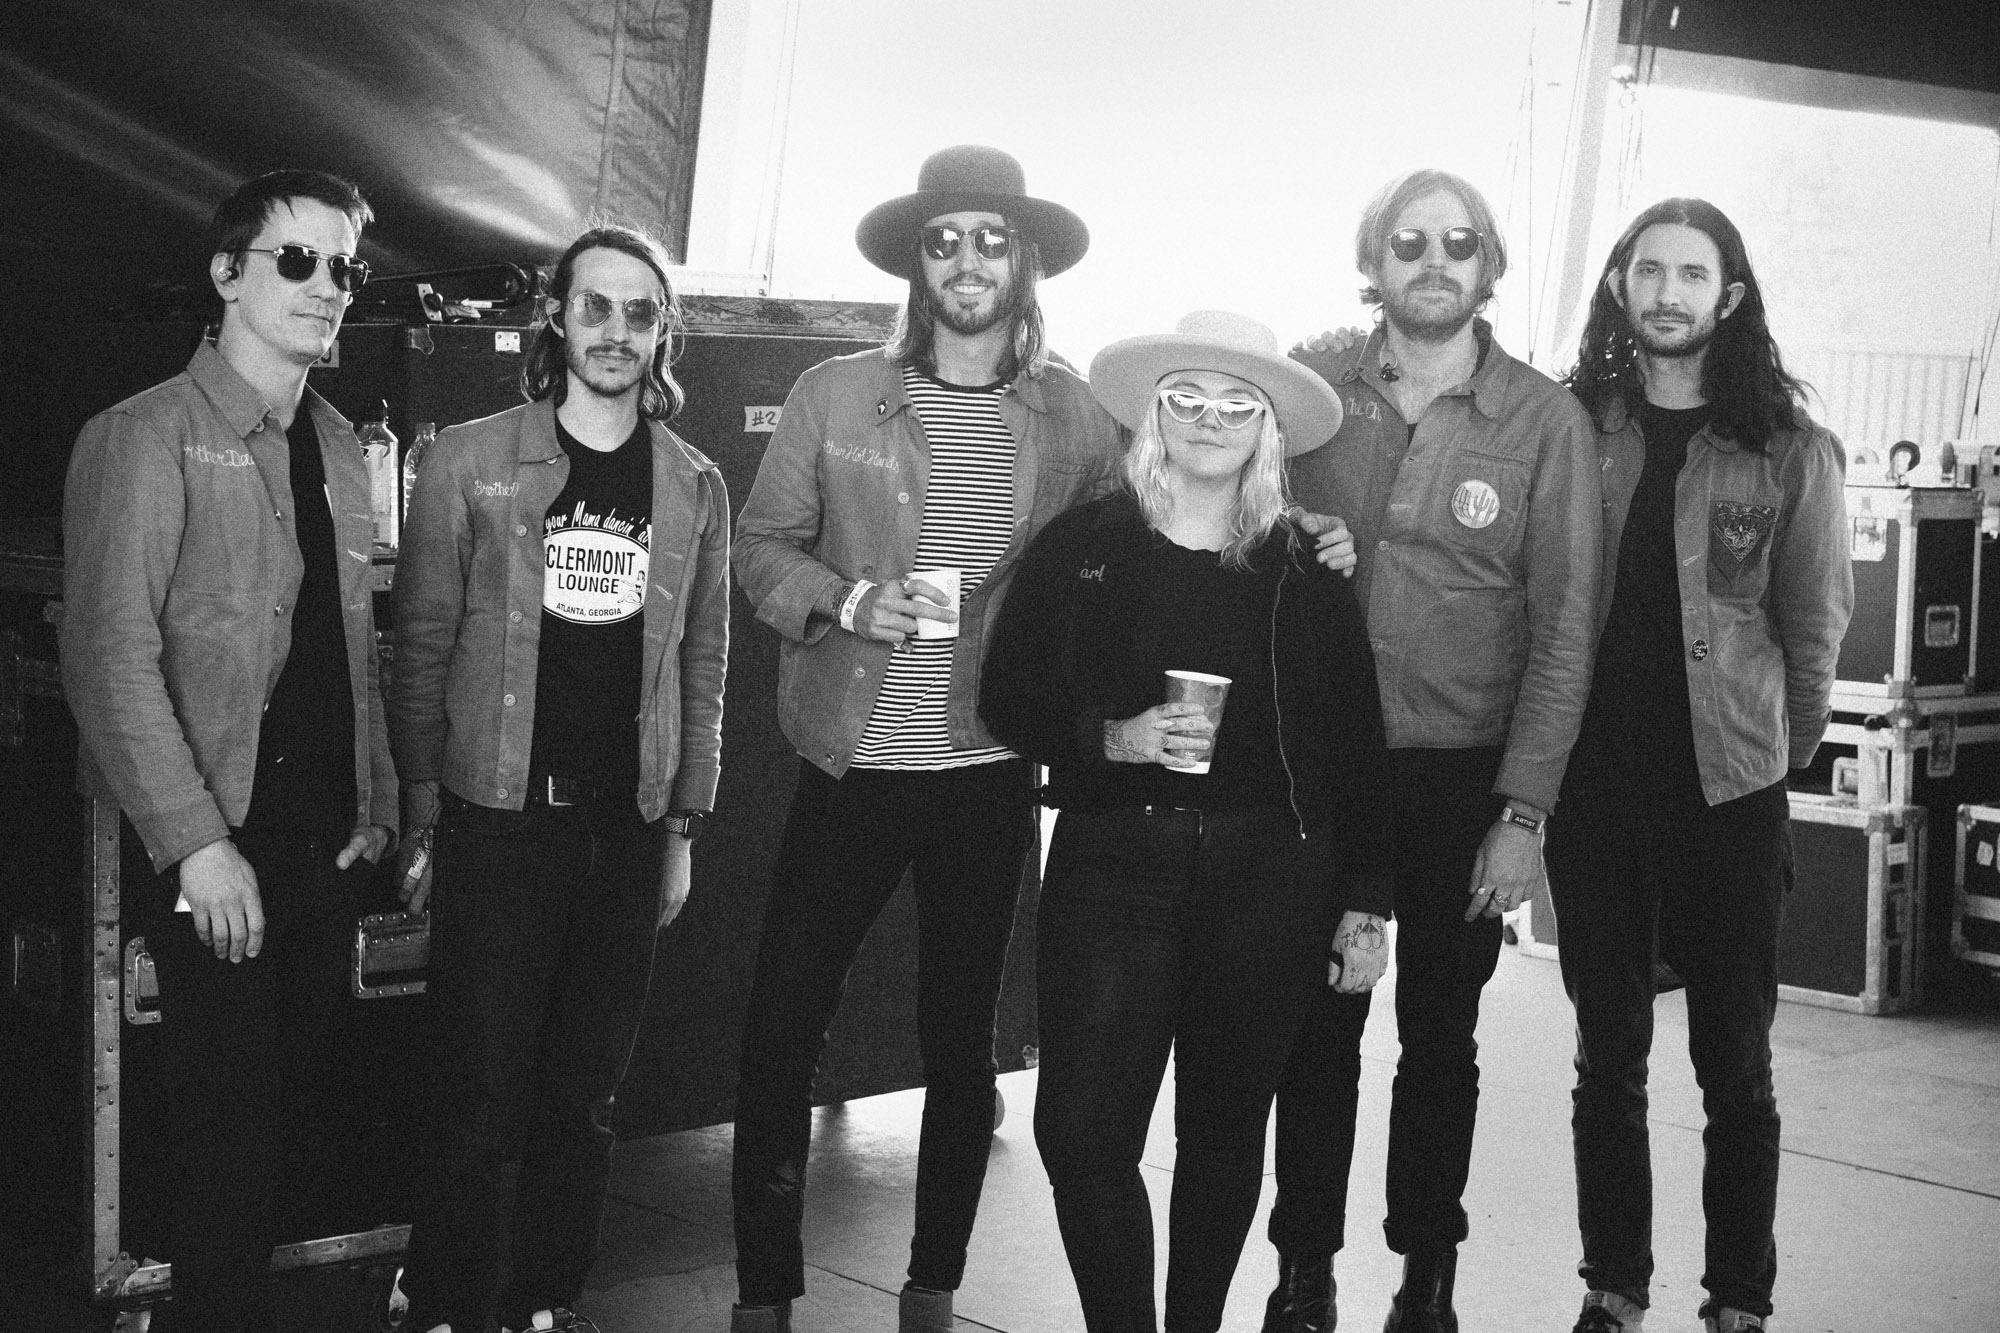 On the Road with Elle King and The Brethren